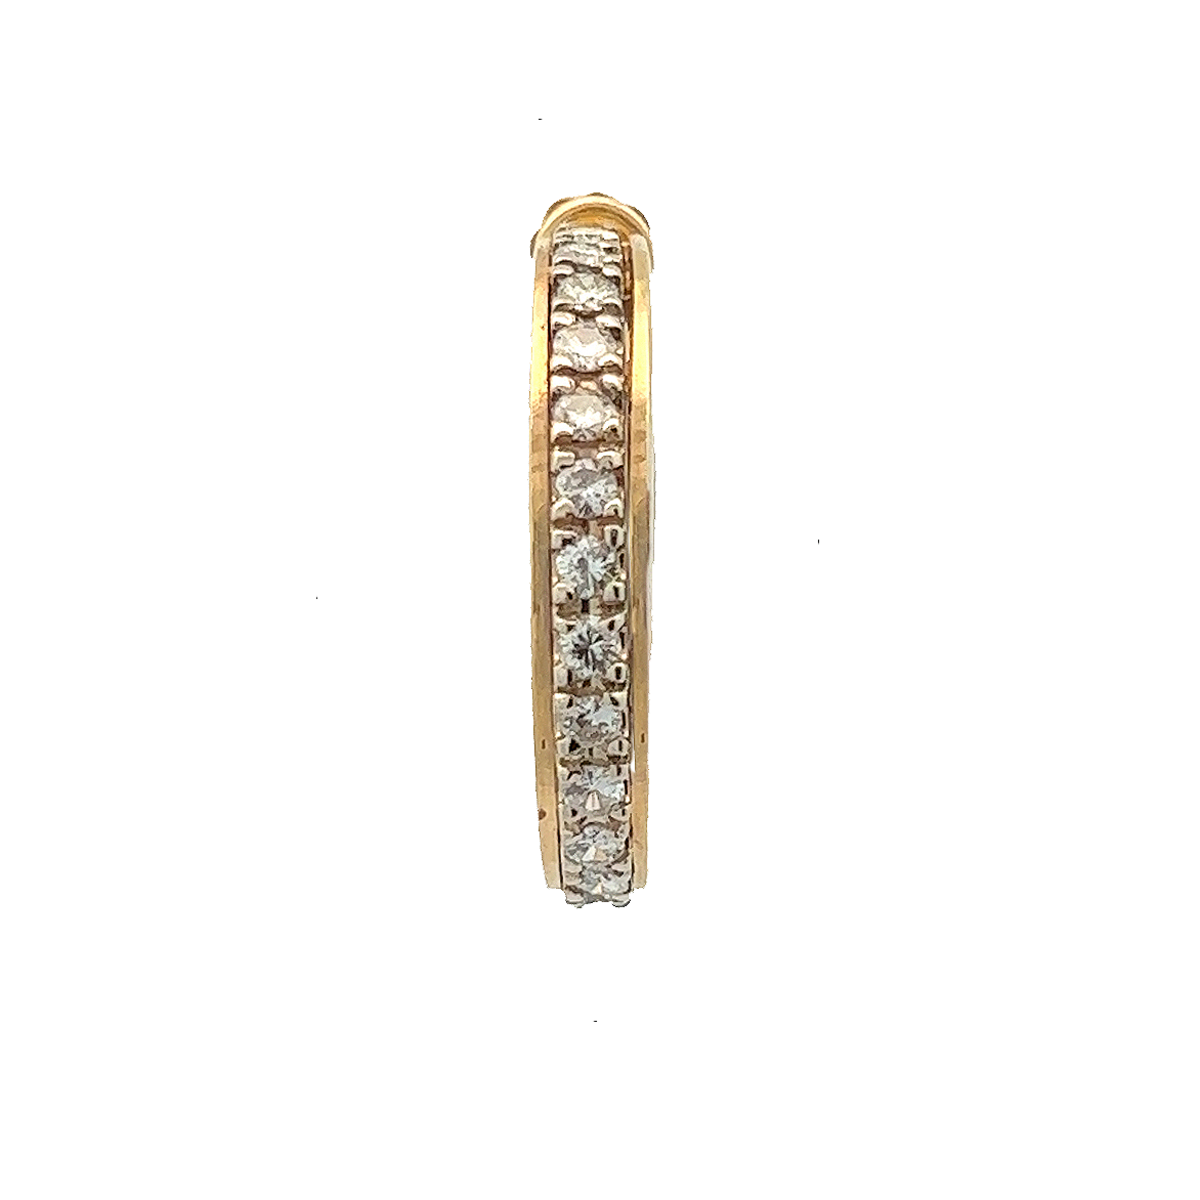 1970s 14KT Yellow Gold Diamond Hoop Earrings front view